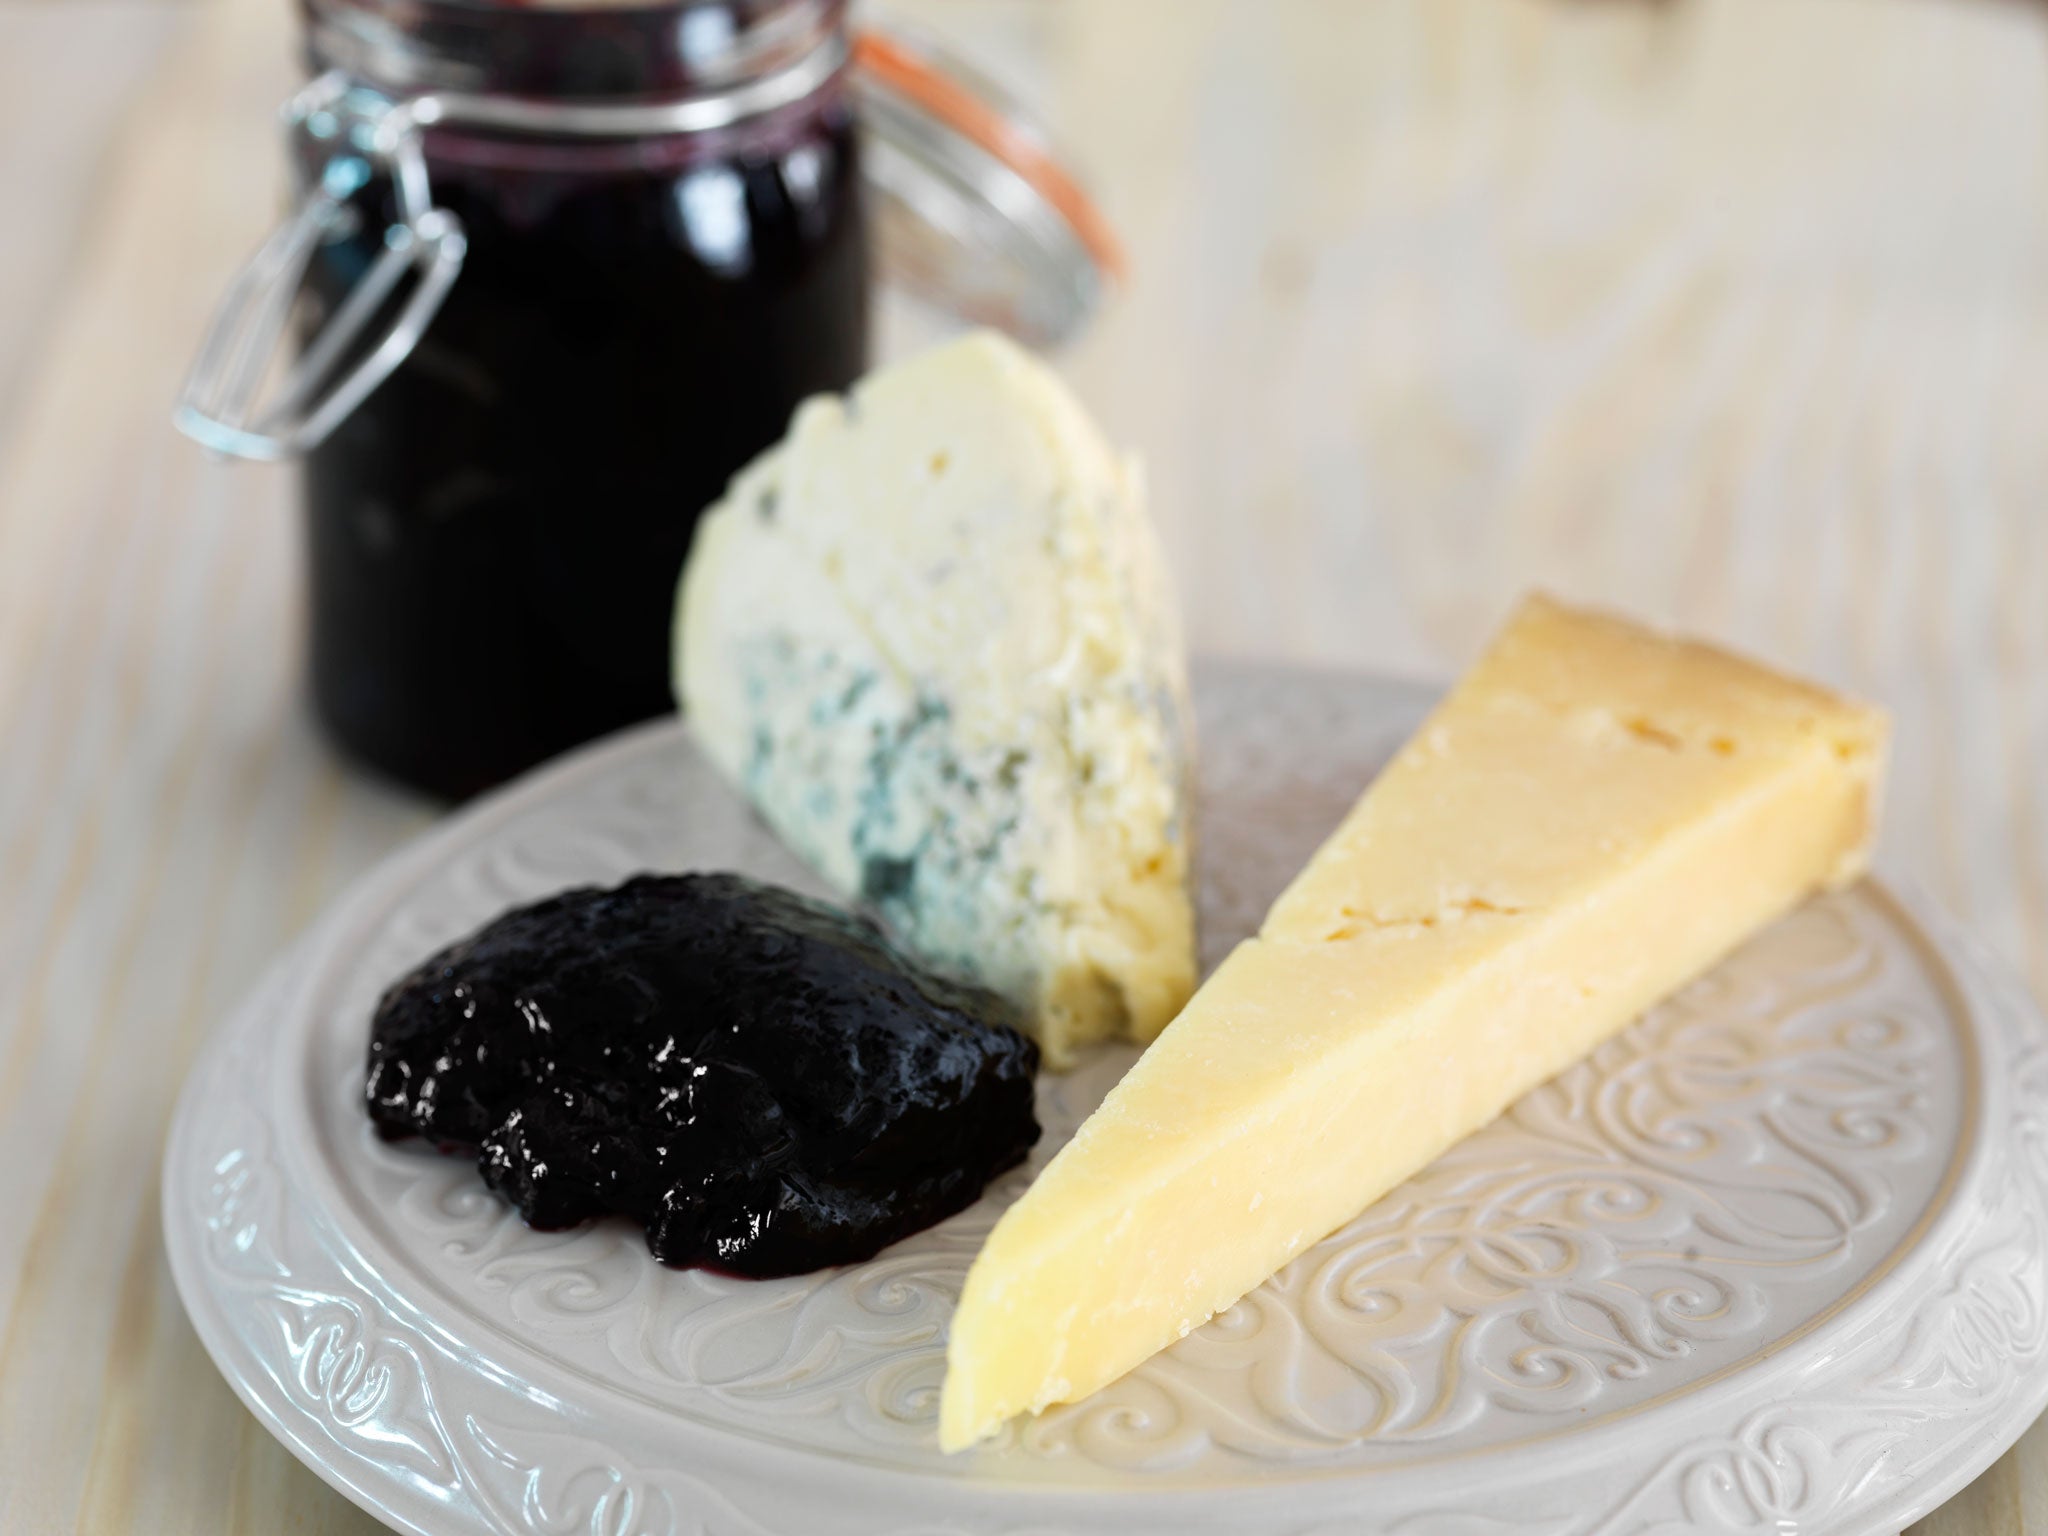 Blackcurrant chilli jelly goes well with cheese, pâtés and terrines